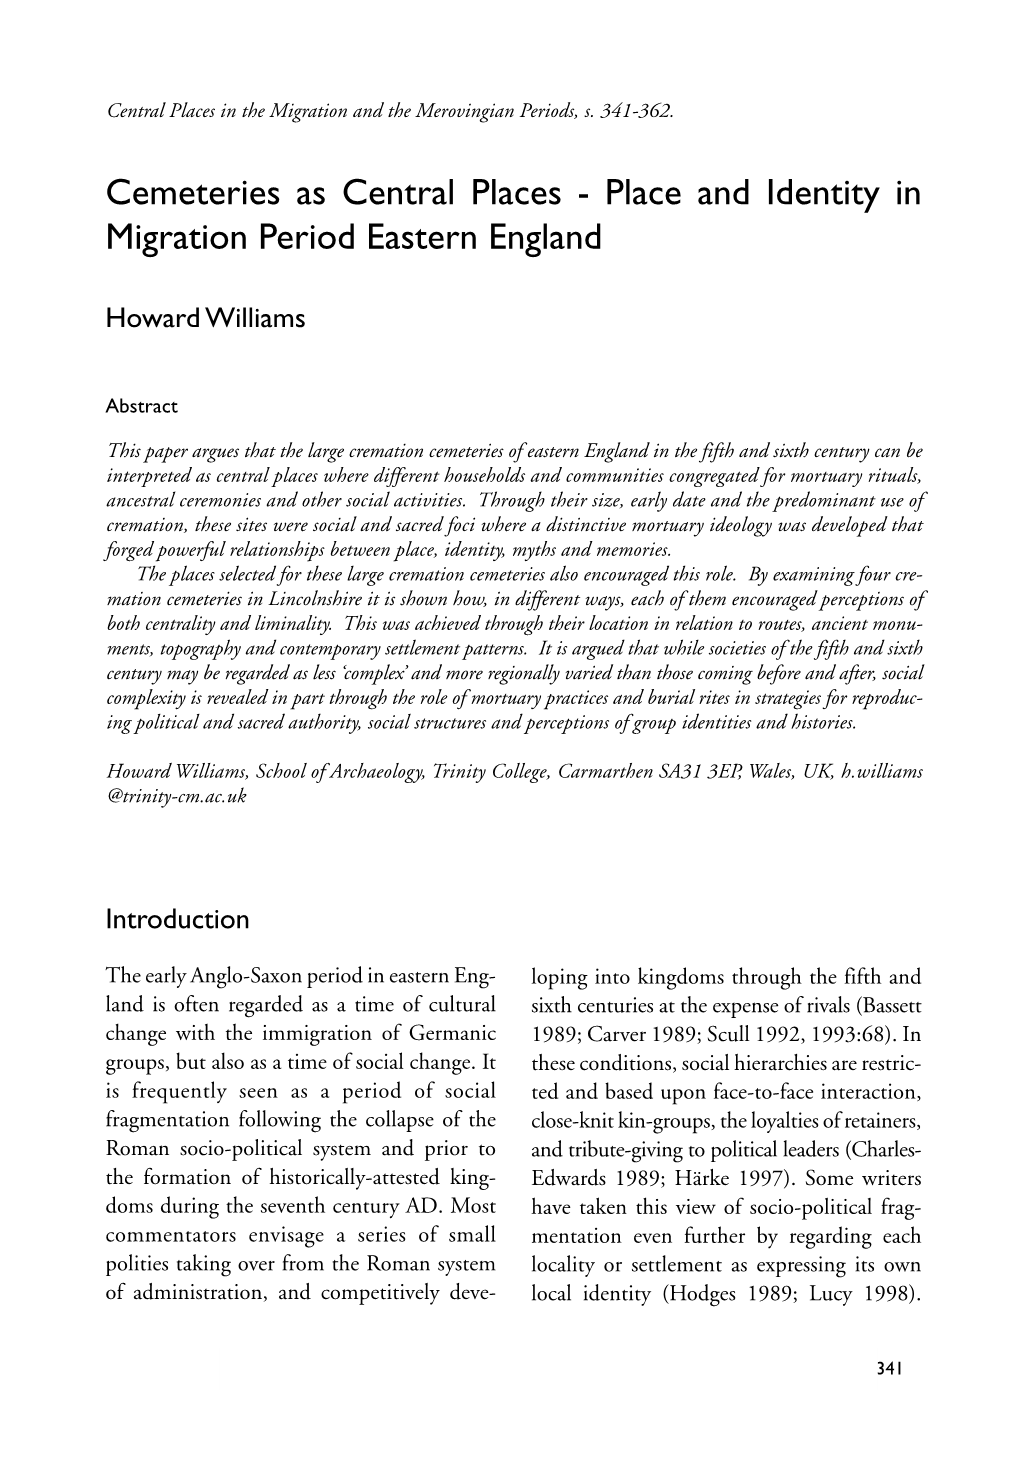 Cemeteries As Central Places - Place and Identity in Migration Period Eastern England